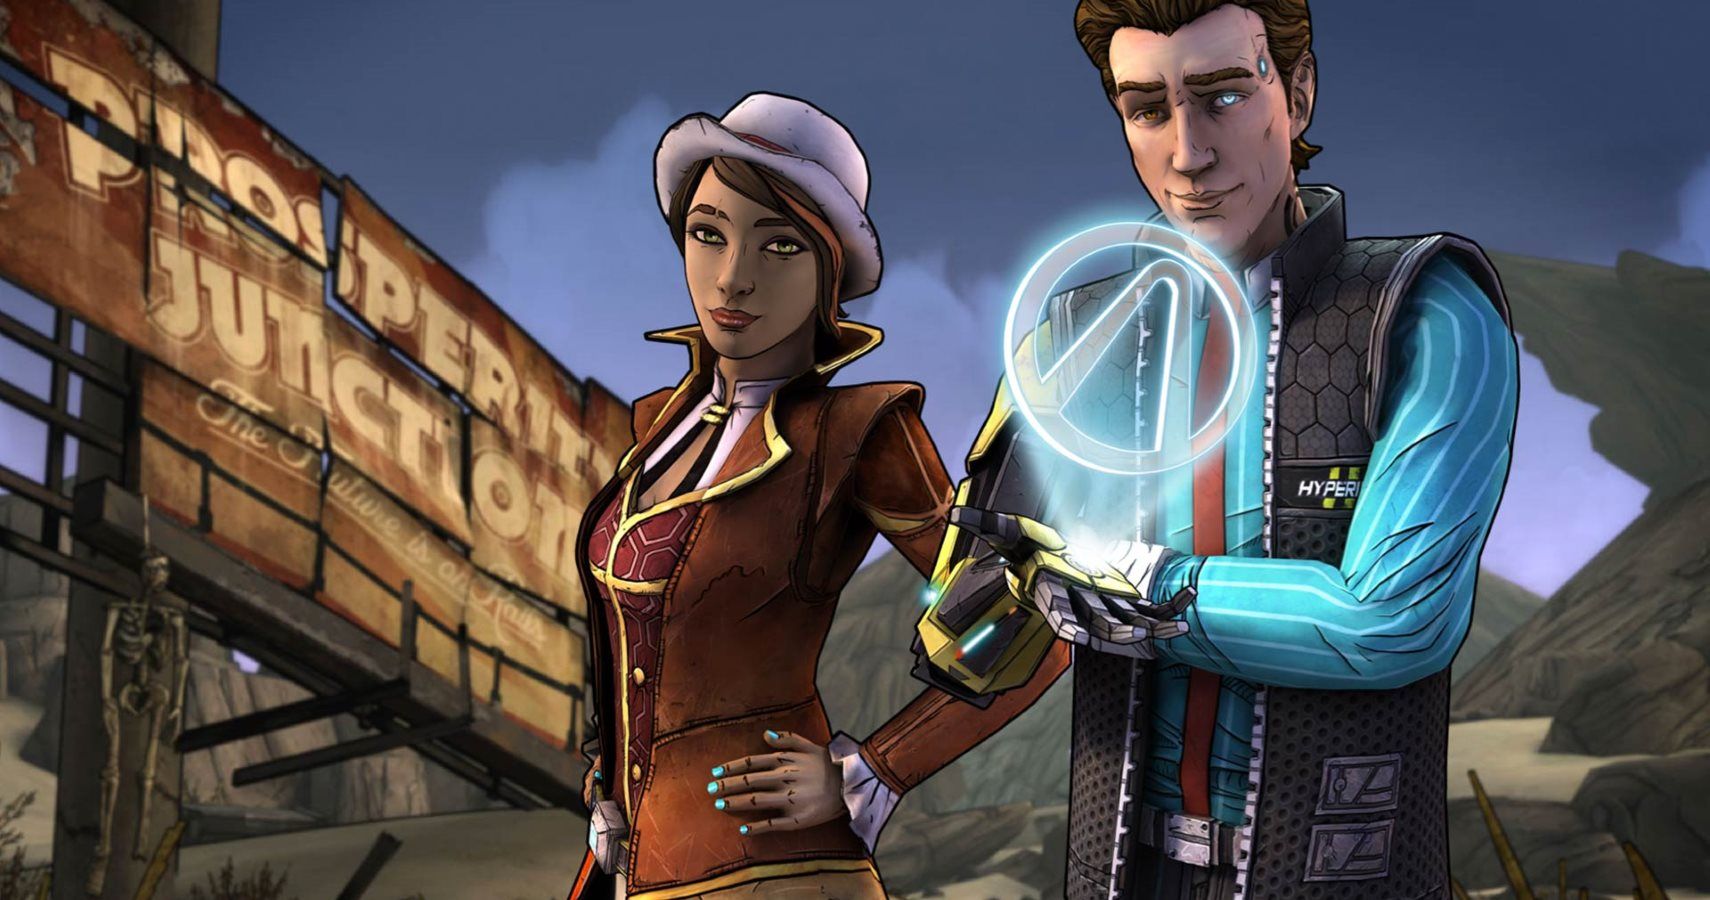 tales from the borderlands ps4 digital download